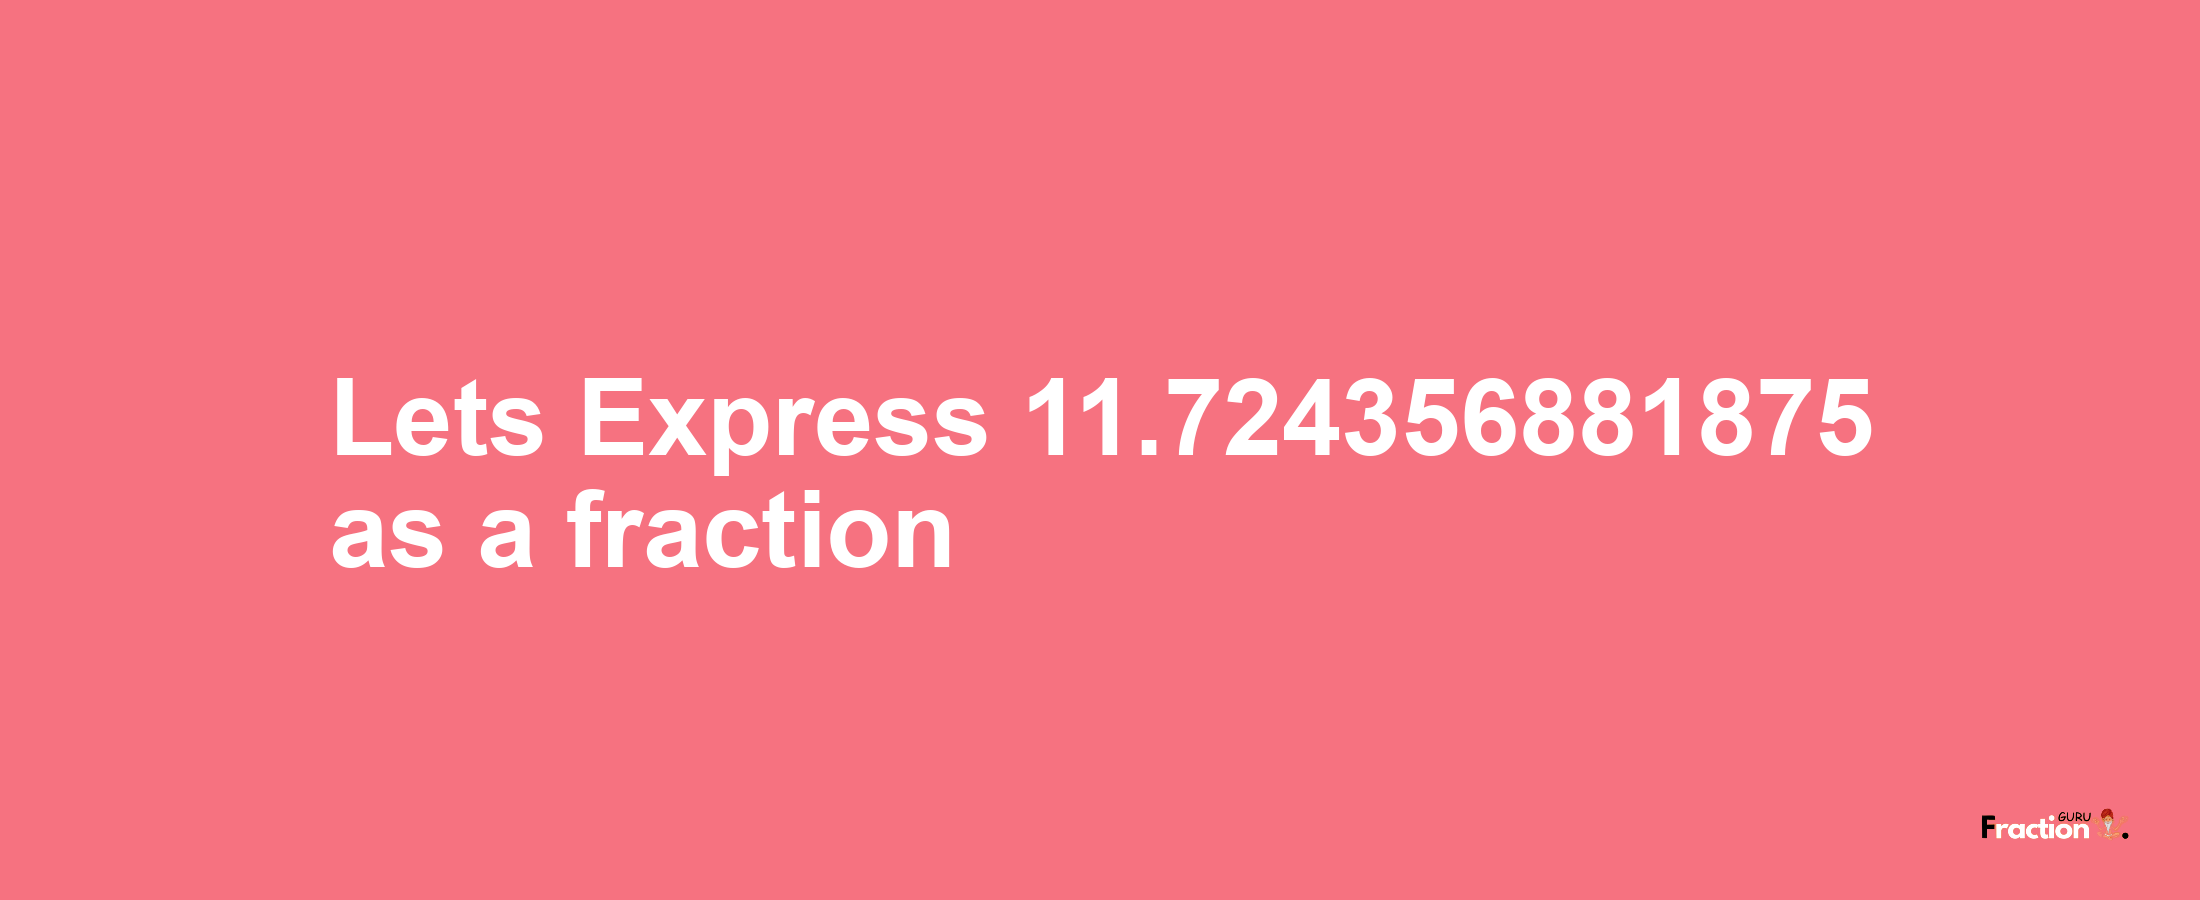 Lets Express 11.724356881875 as afraction